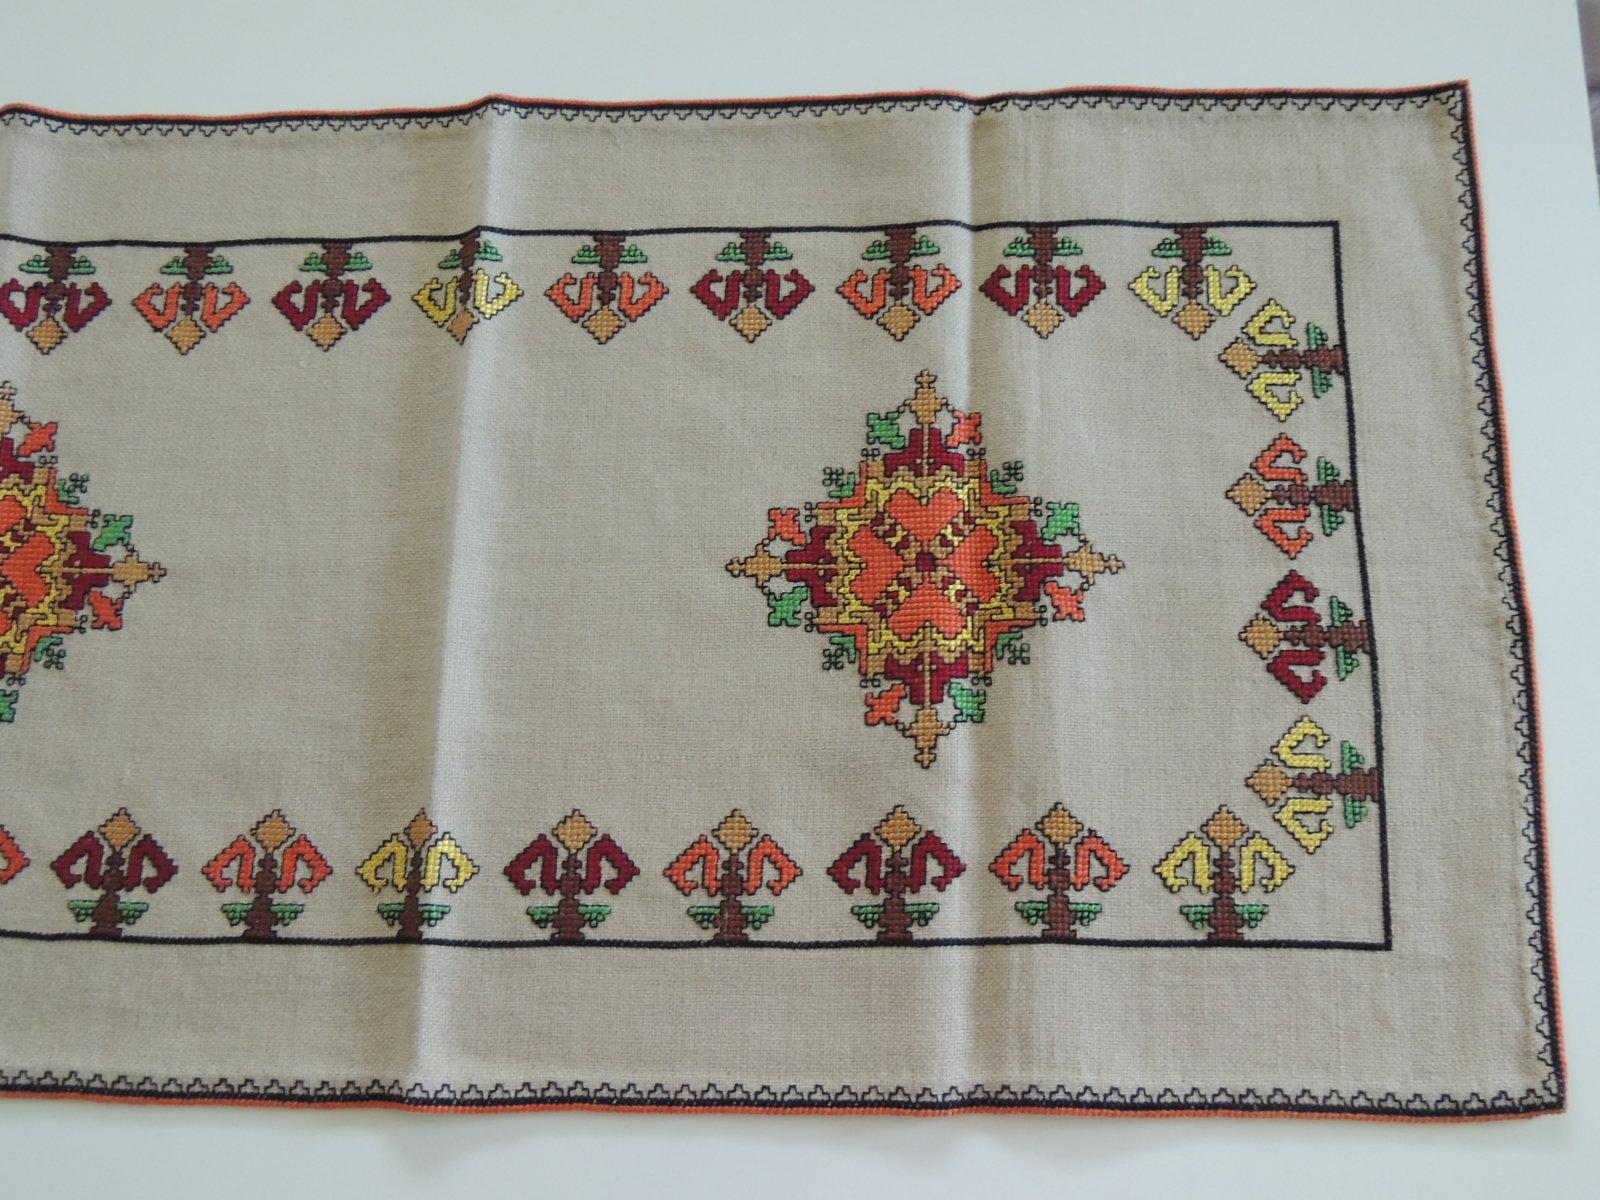 Vintage colorful embroidered table runner textile.
Silk on linen, crossed-stitch in shades of green, orange, black, red, brown and yellow.
Ideal as a curtain valance, pillow or table runner.
Size: 16